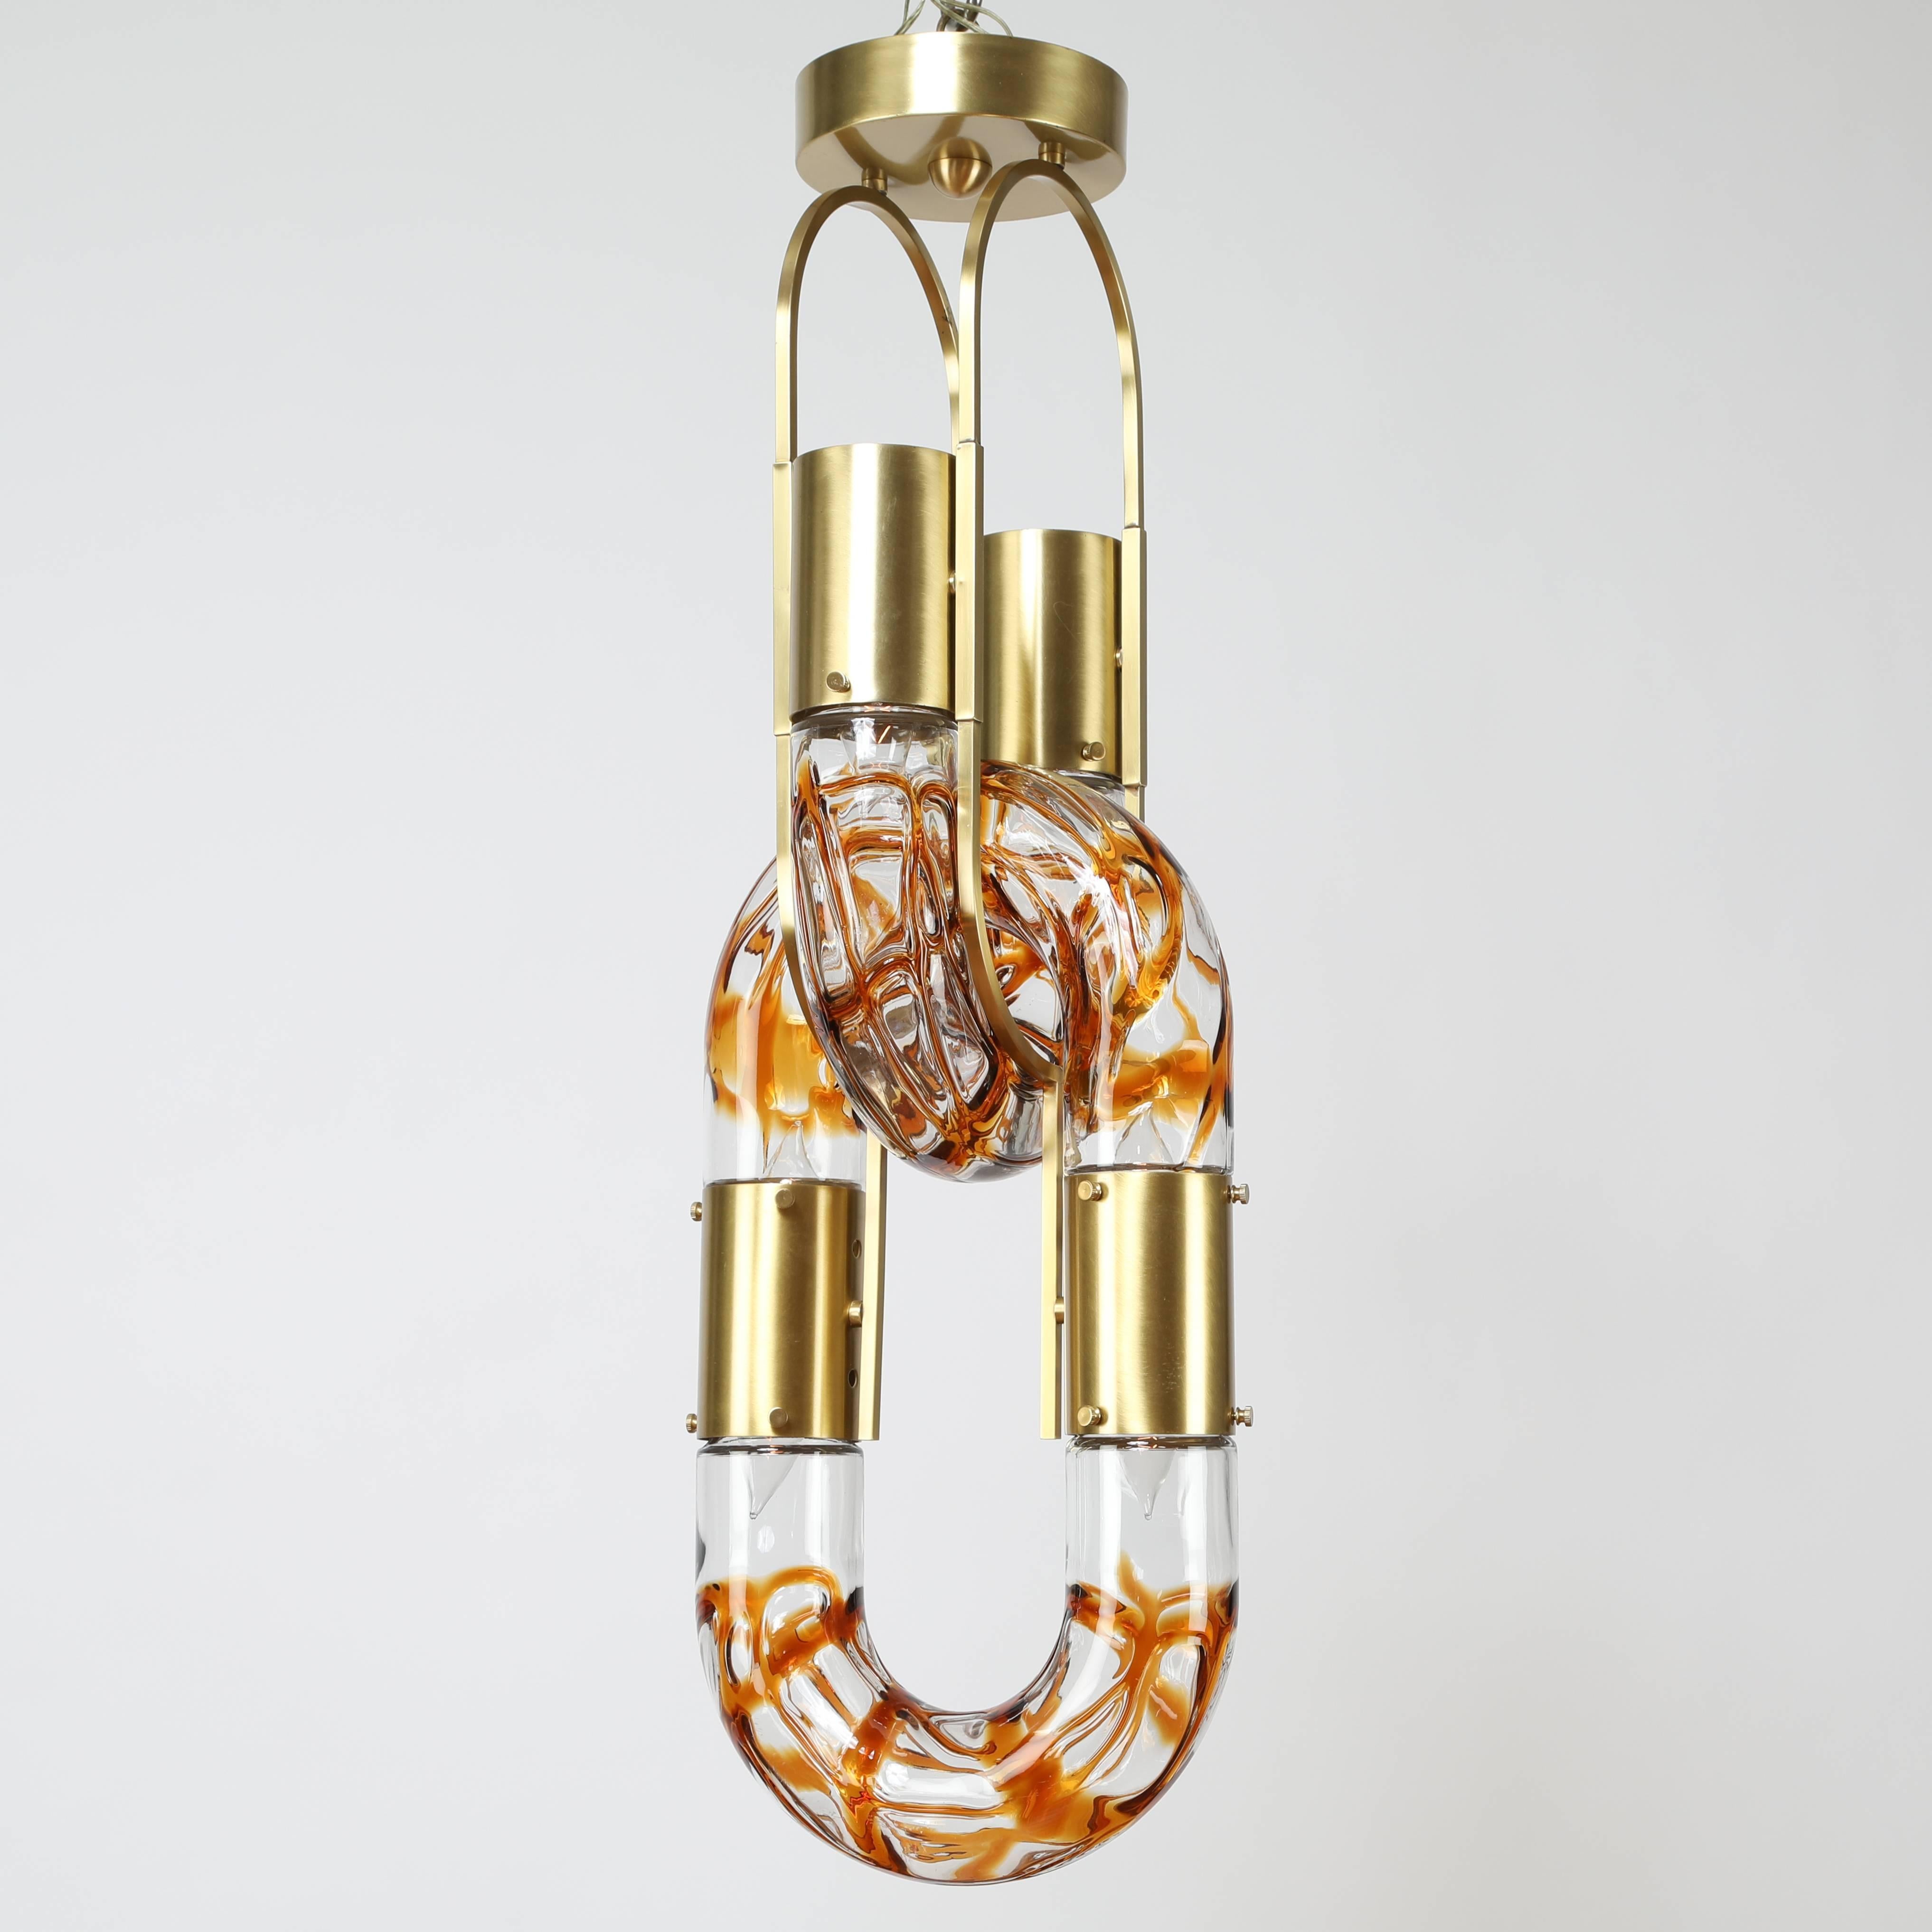 Stunning two-link "Chain" light by Aldo Nason for A.V. Mazzega, Italy, circa 1970s. The "Chain" series by Nason came in a variety of sizes and finishes and included ceiling fixtures as well as floor lamps. This very fine example